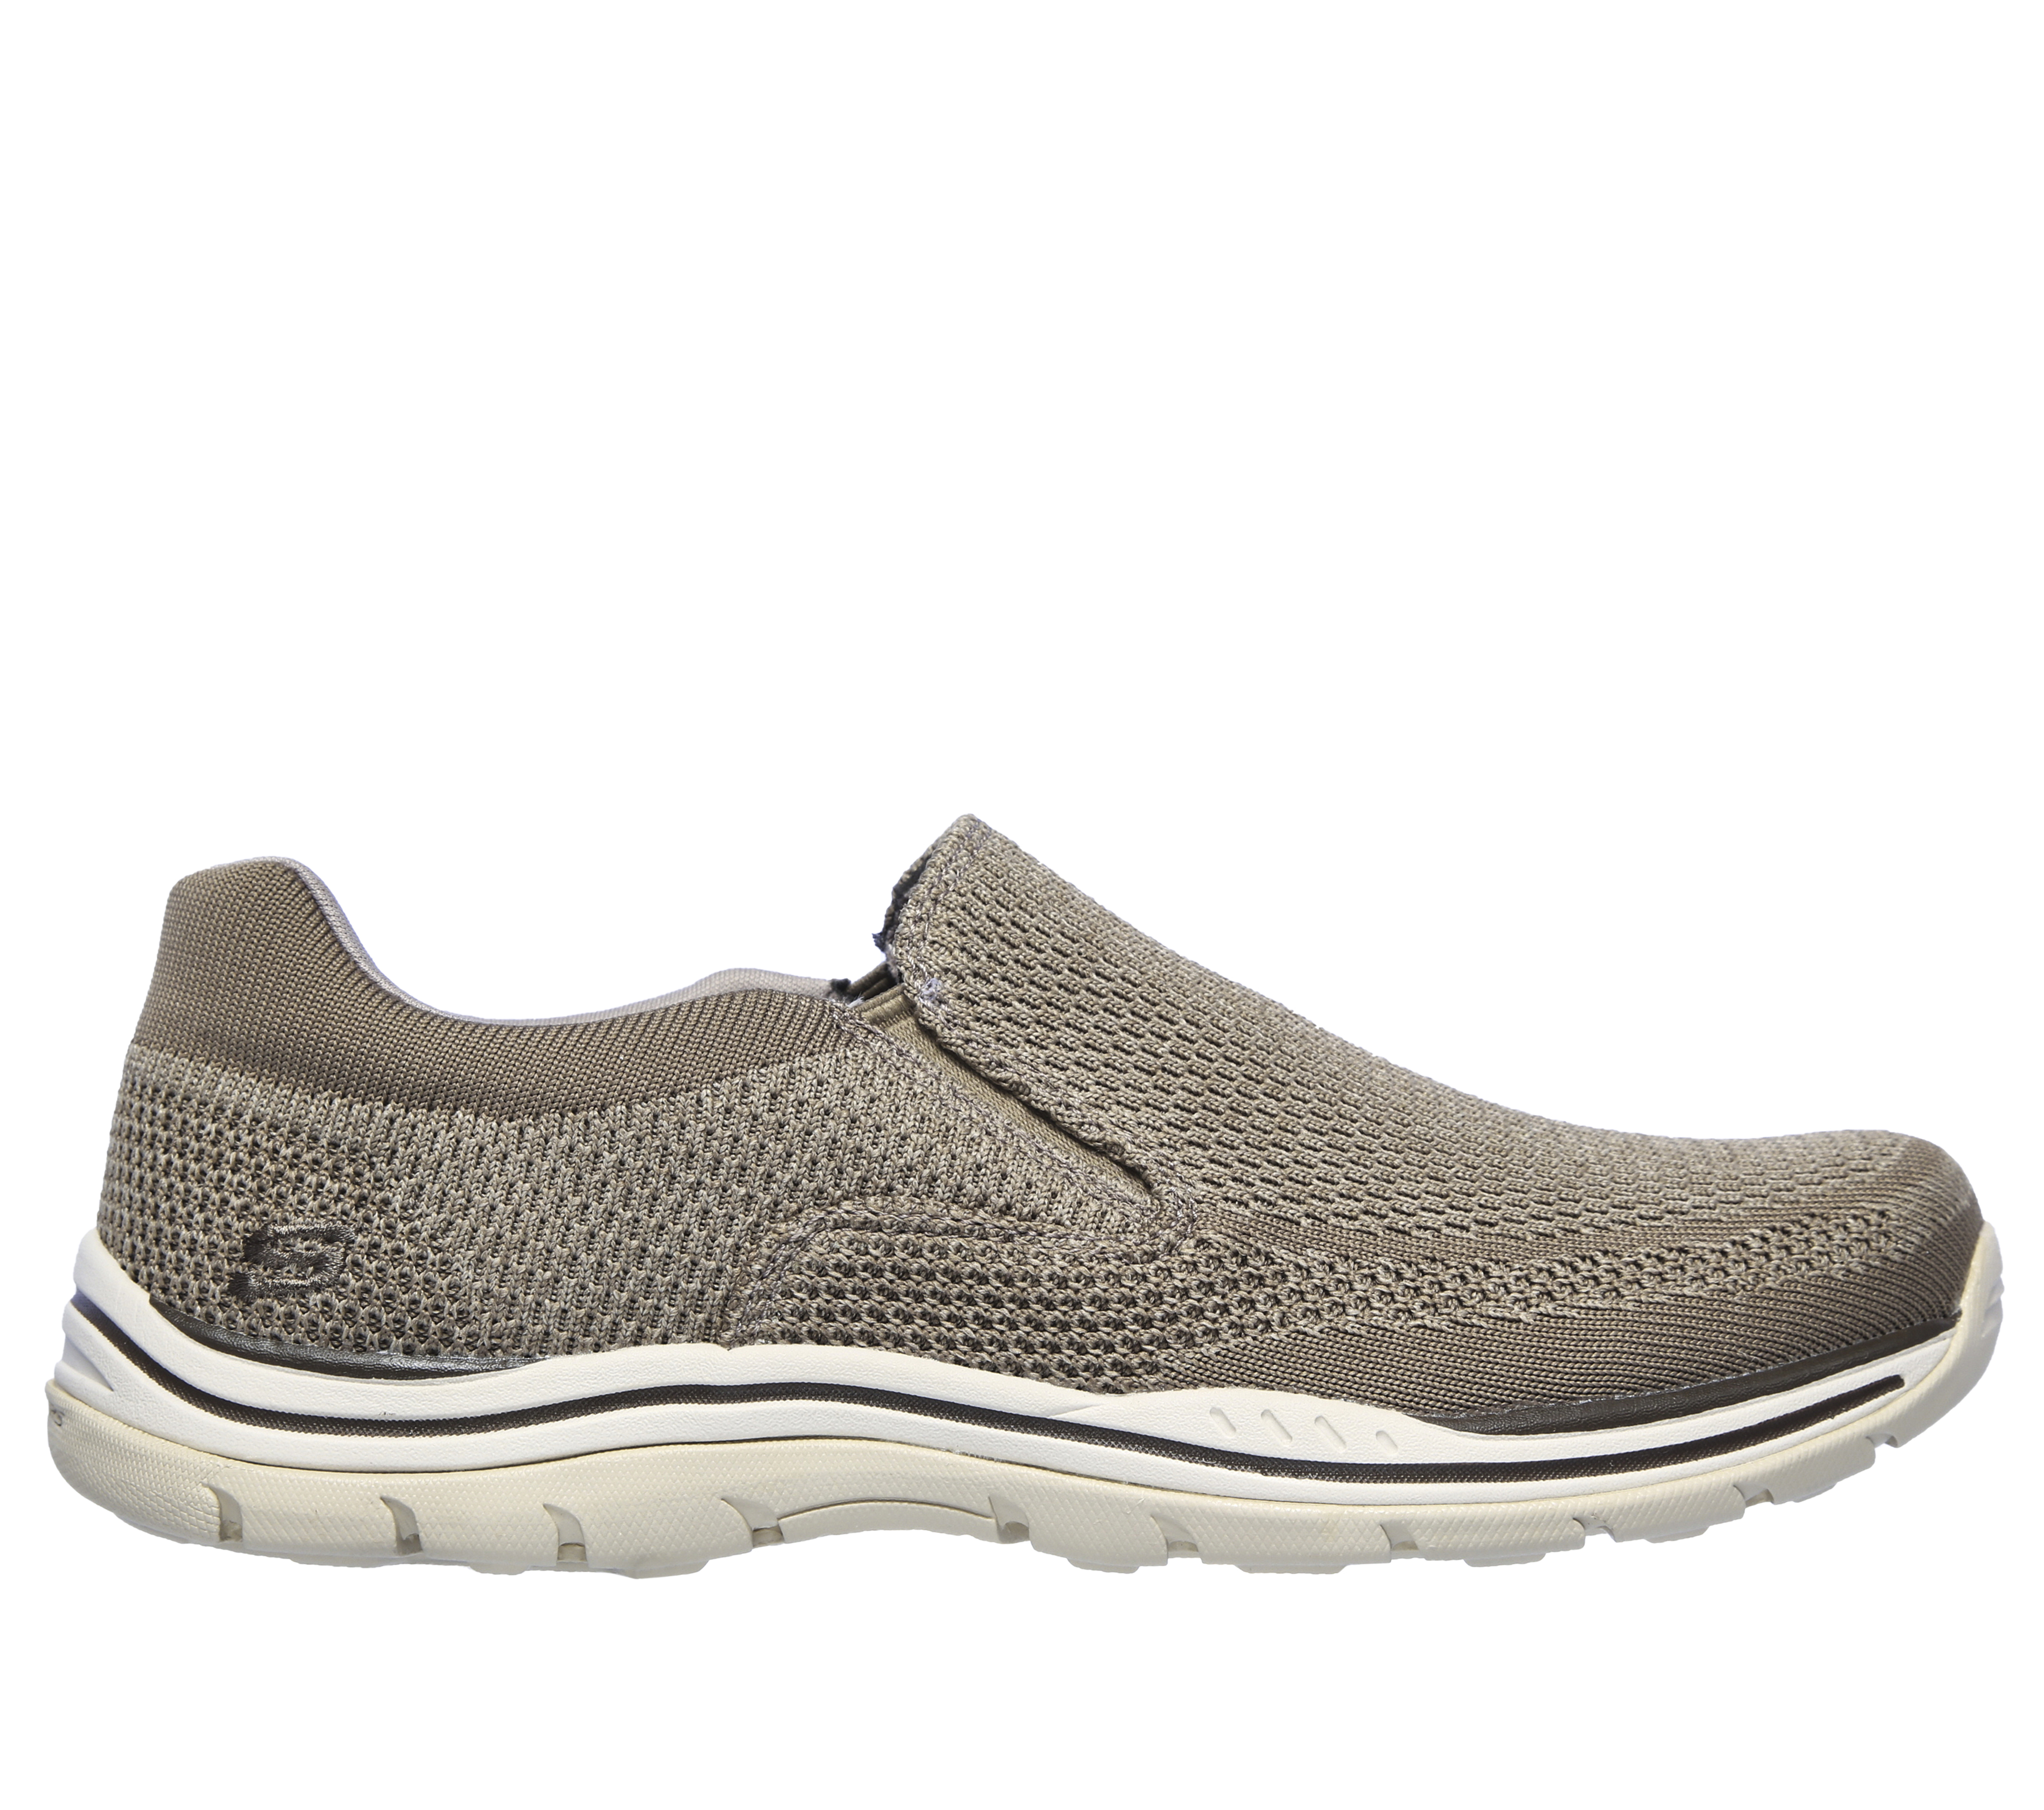 Relaxed Fit: Expected - Gomel | SKECHERS